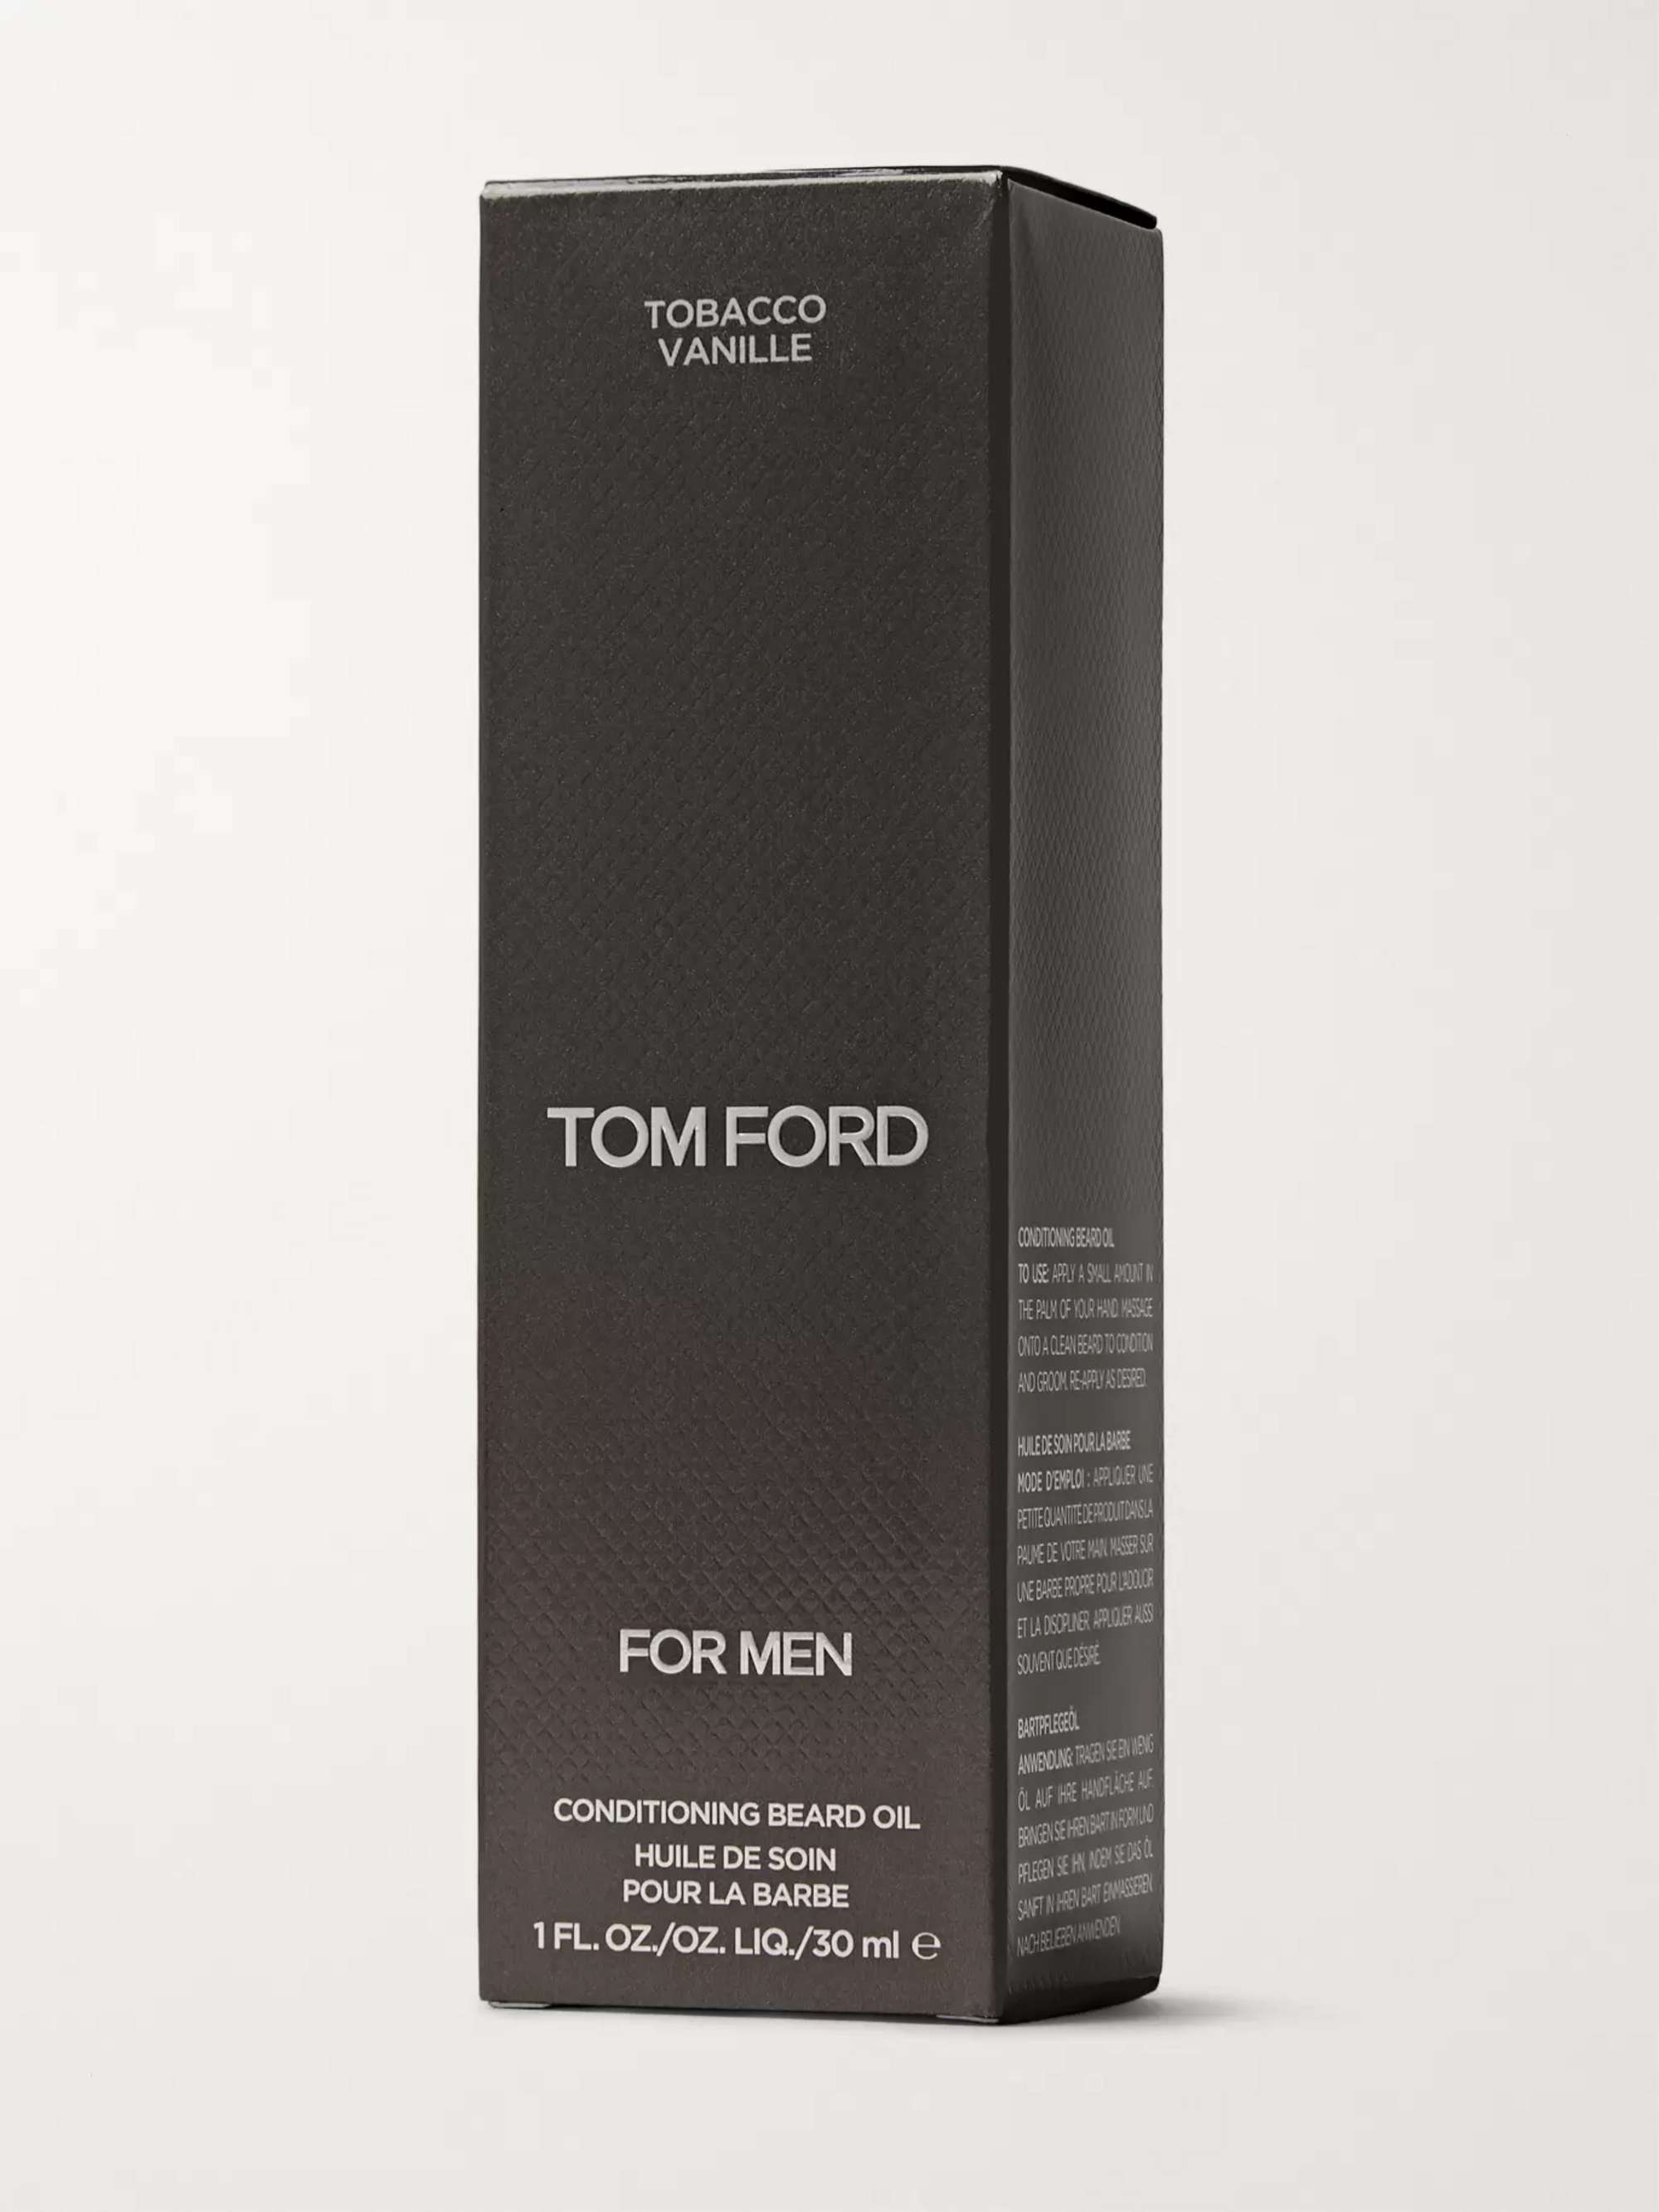 TOM FORD BEAUTY Tobacco Vanille Conditioning Beard Oil, 30ml